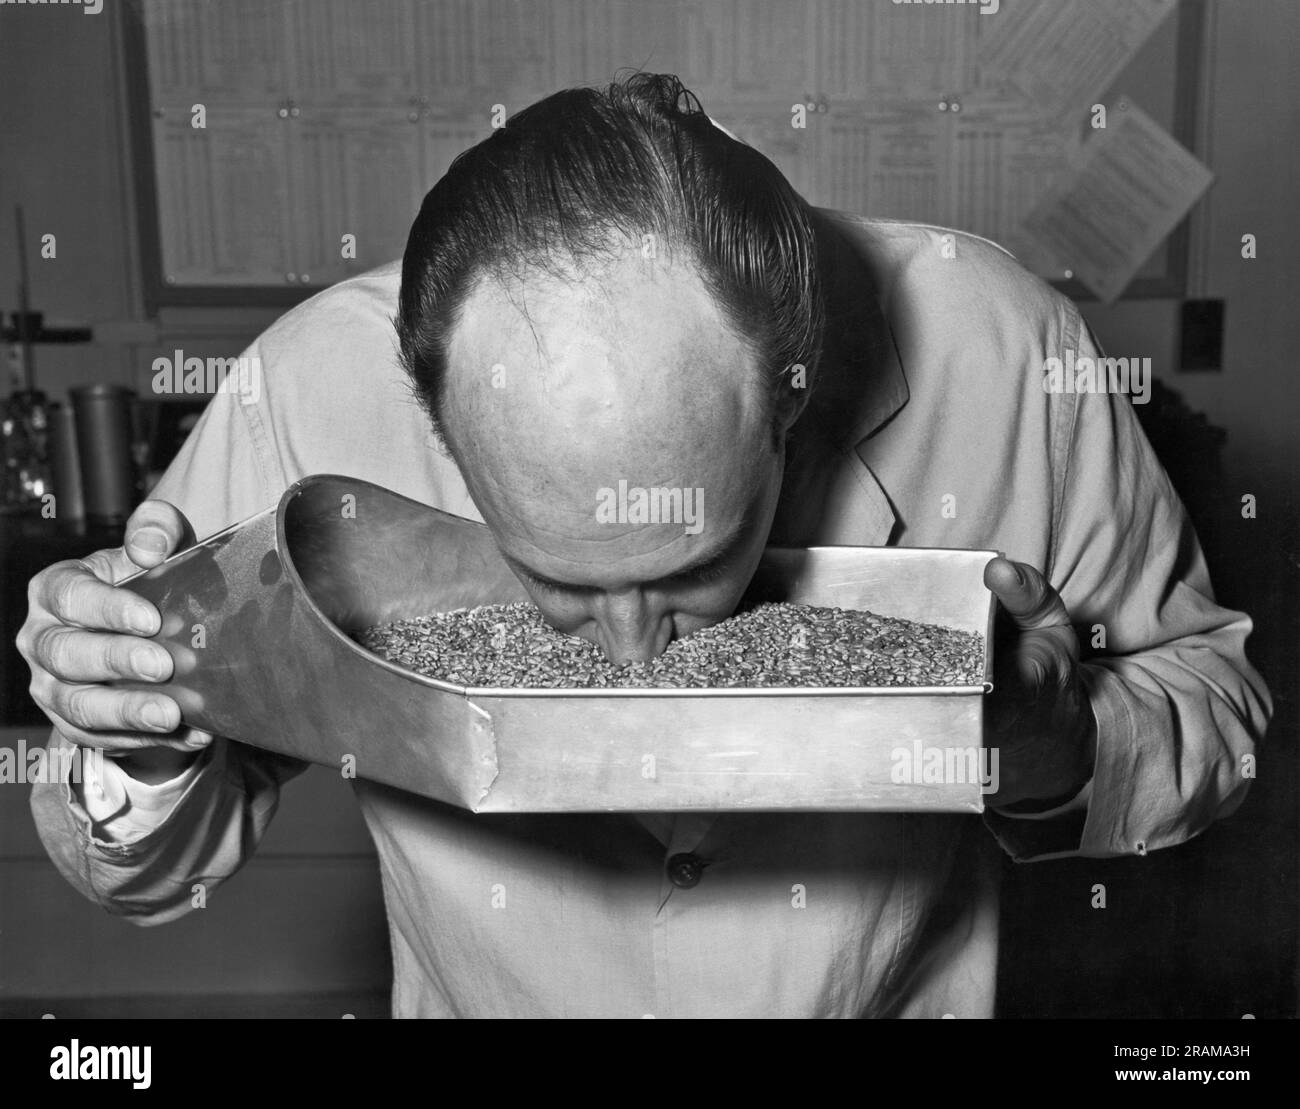 Baltimore, Maryland:  February 27, 1964 A Department of Agriculture employee tests a batch of grain by checking its aroma. Stock Photo